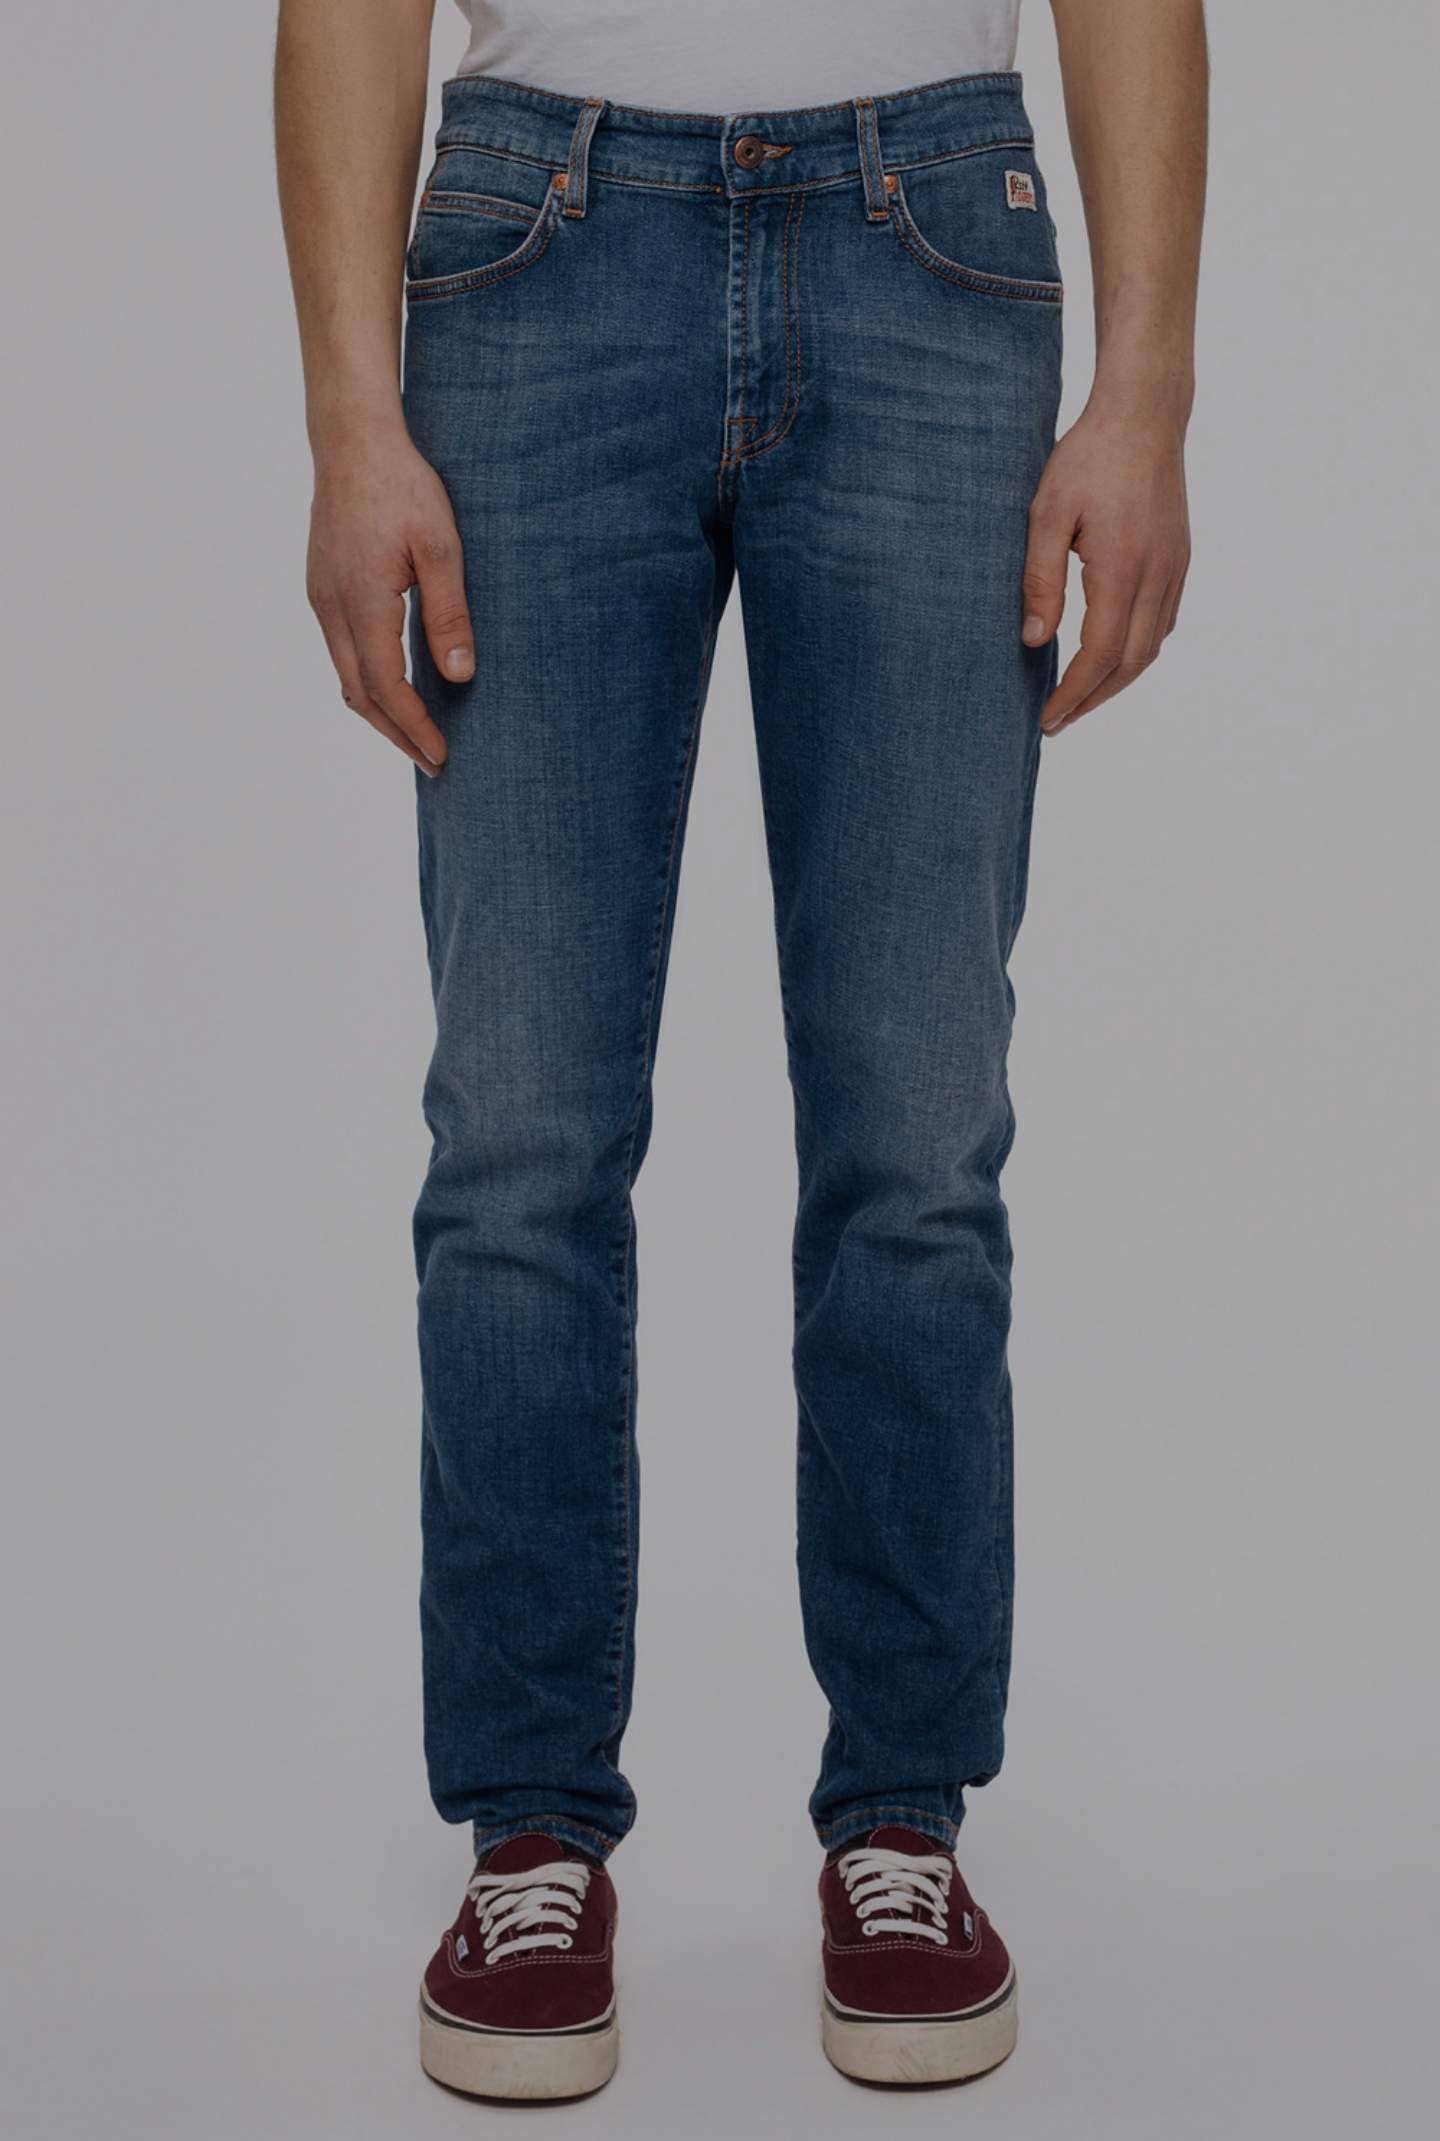 Jeans Roy Roger's 517 stretch nick